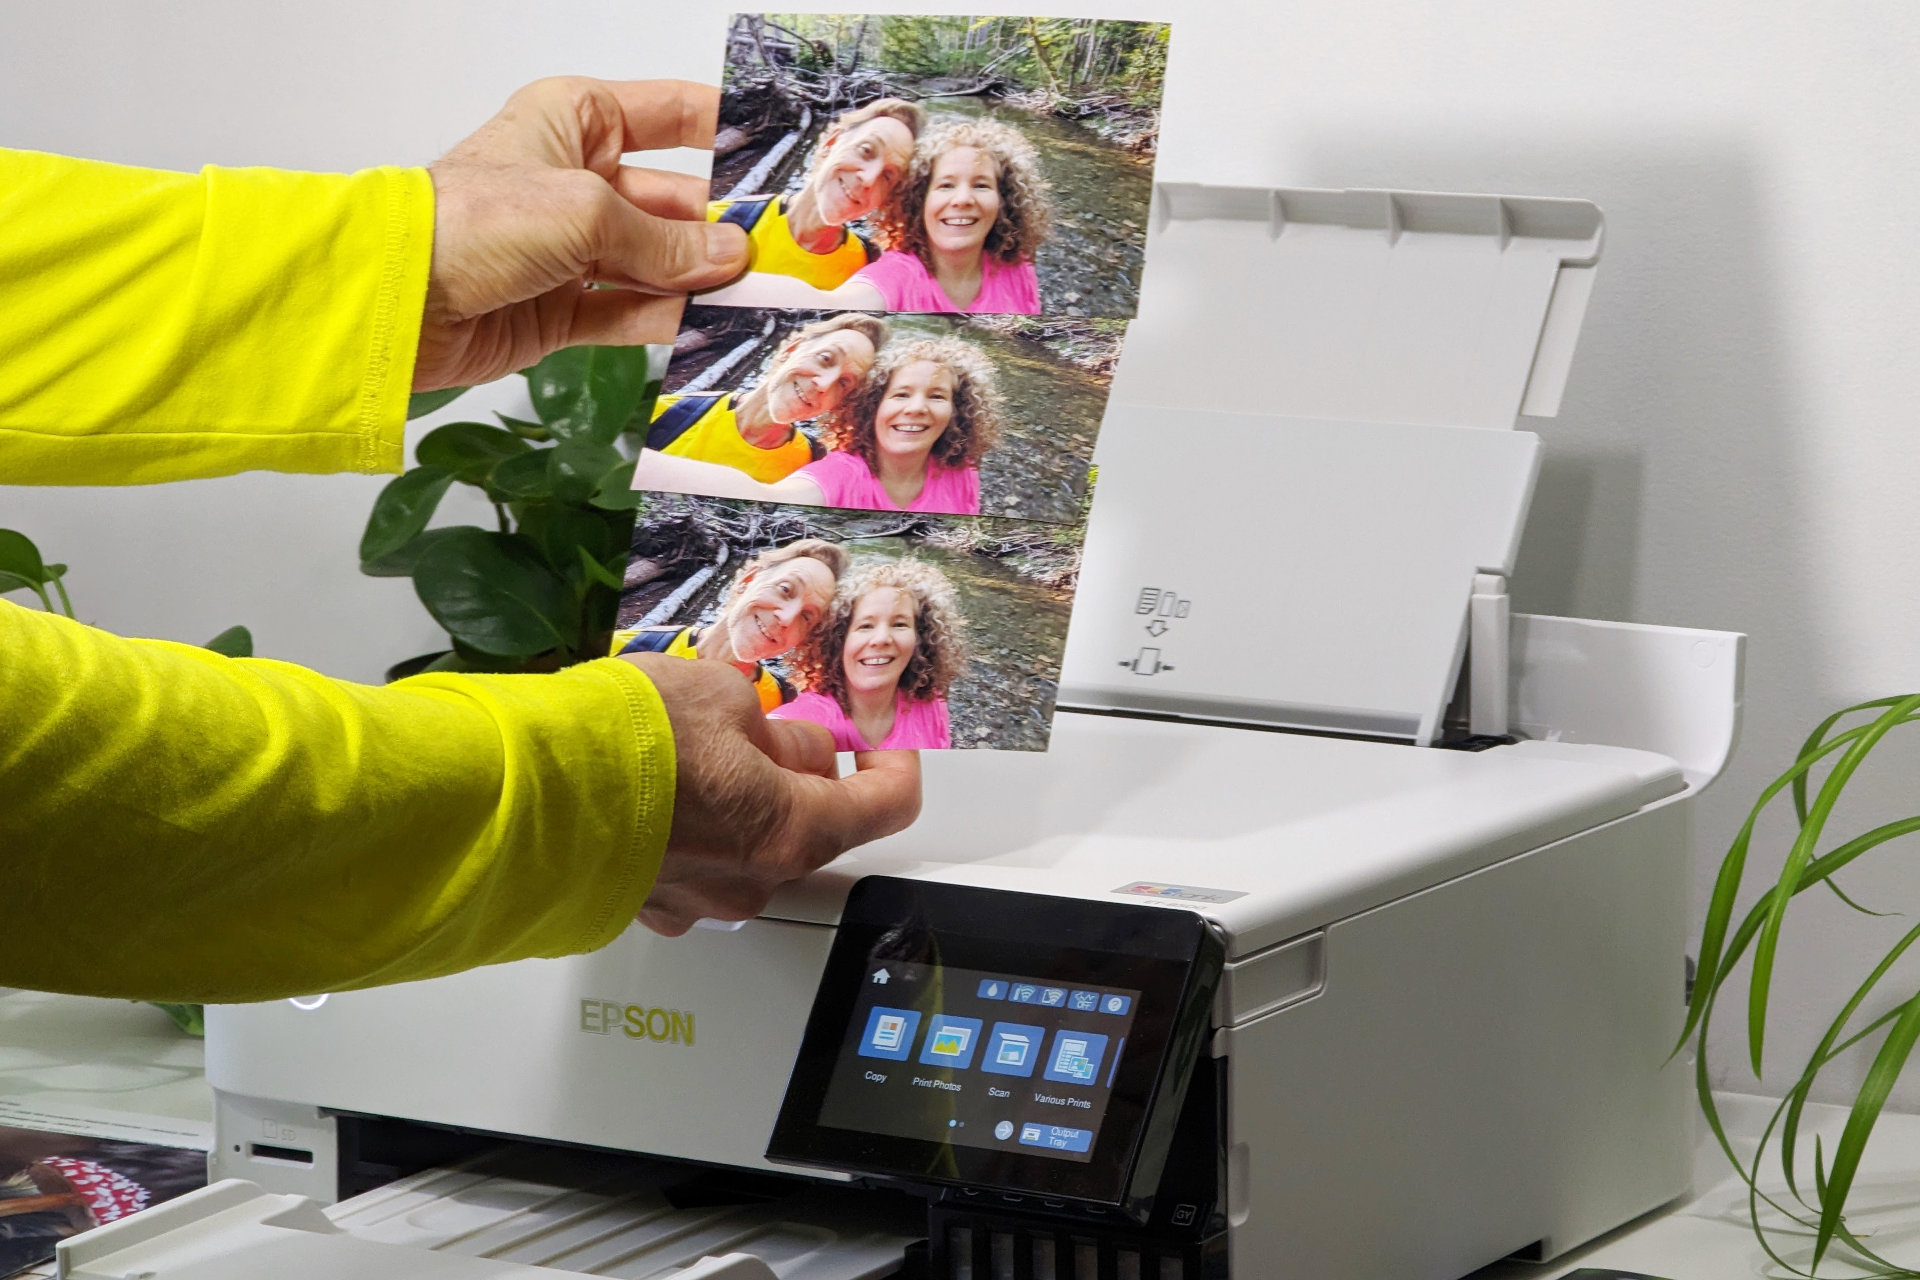 Review of the Epson EcoTank Photo ET 8500 All-in-One Printer